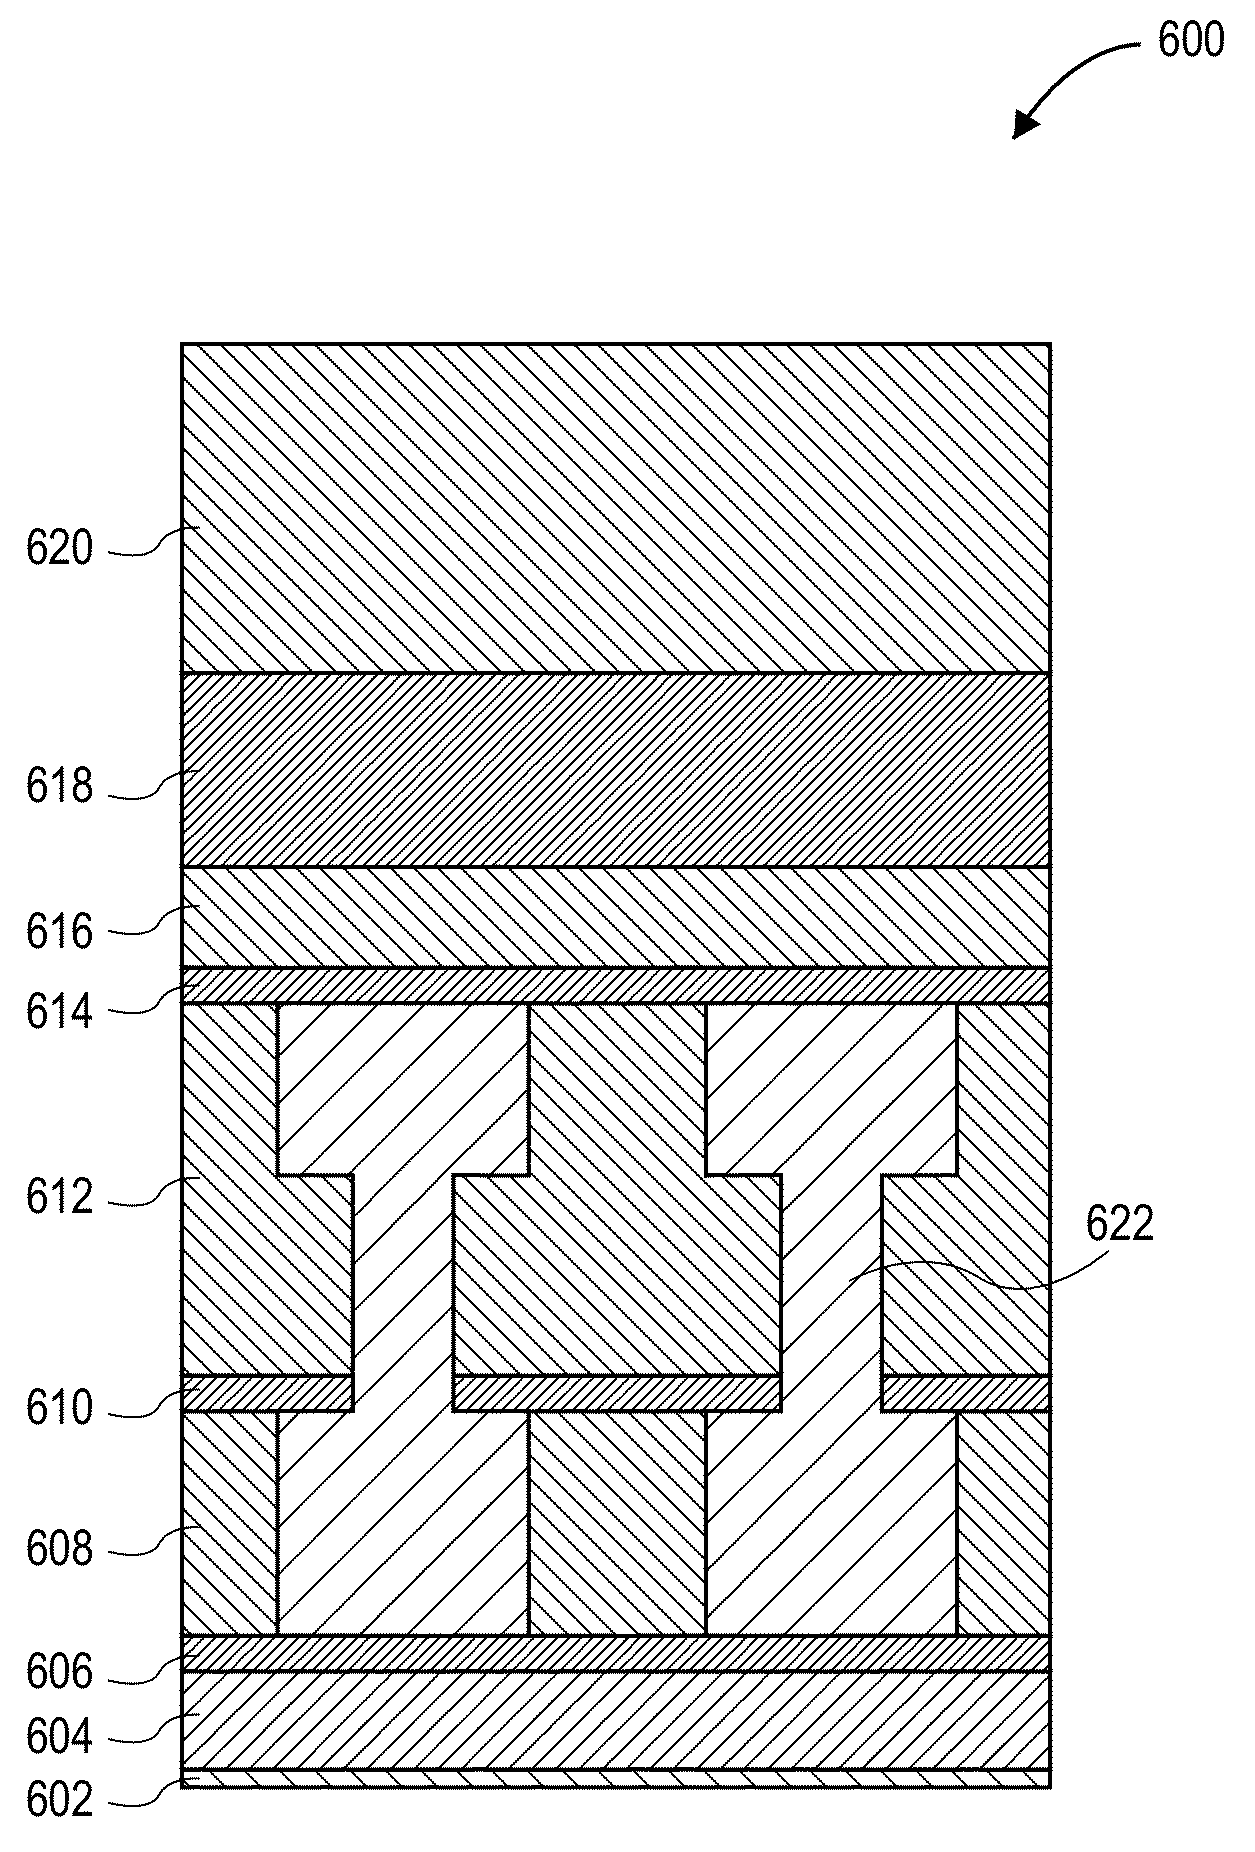 Wafer dicing using hybrid multi-step laser scribing process with plasma etch